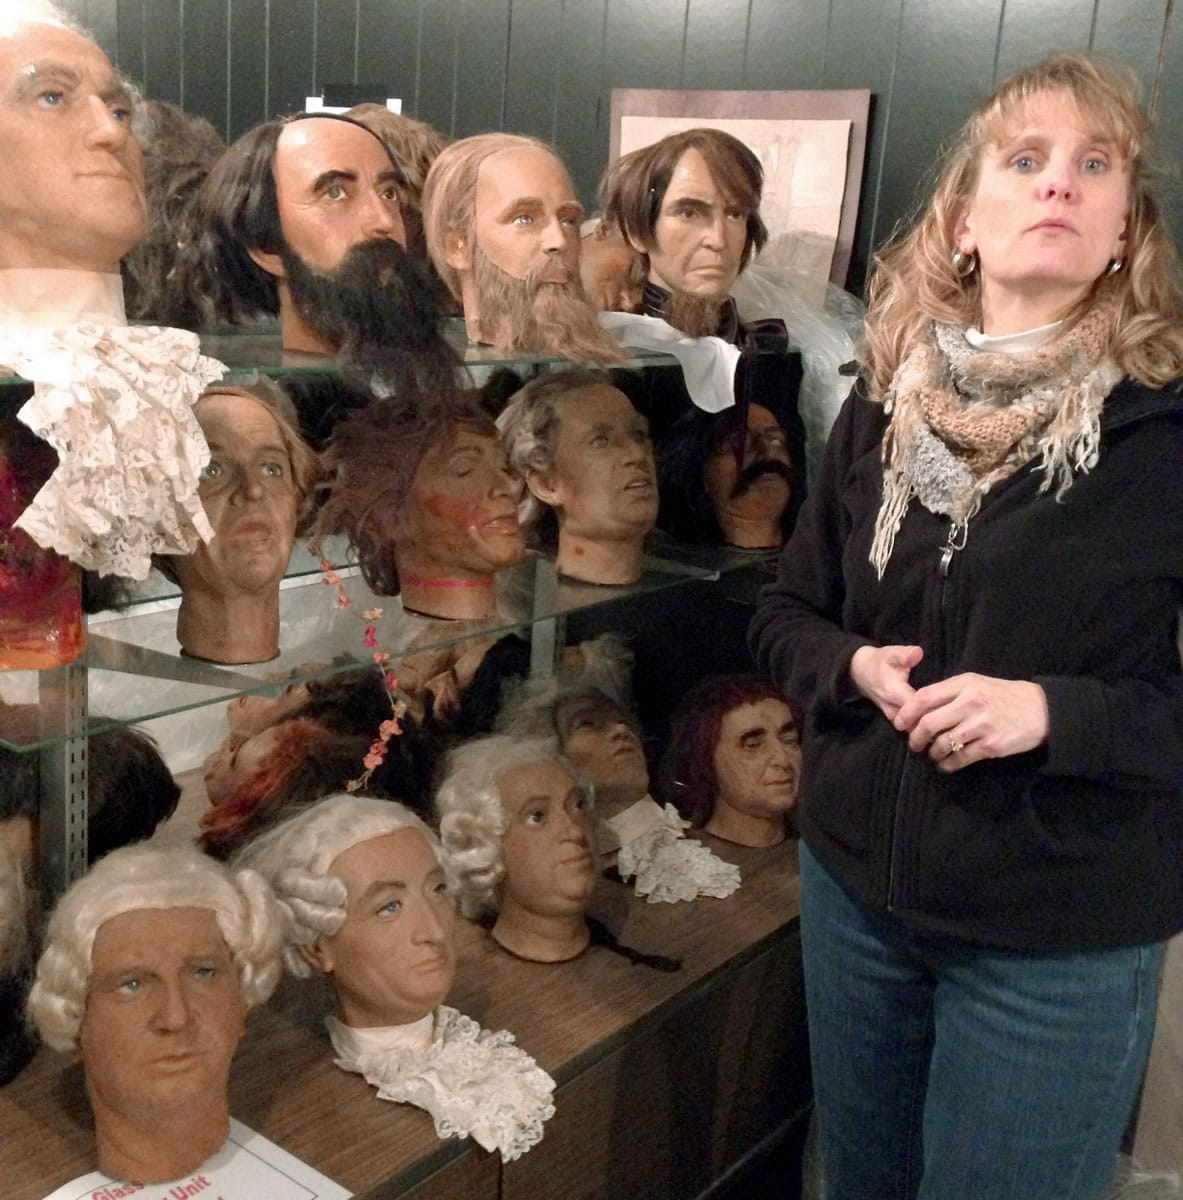 Tammy Myers, who runs the American Civil War Wax Museum for FutureStake Inc., stands Thursday beside shelves of heads of characters from the museum in Gettysburg, Pa.